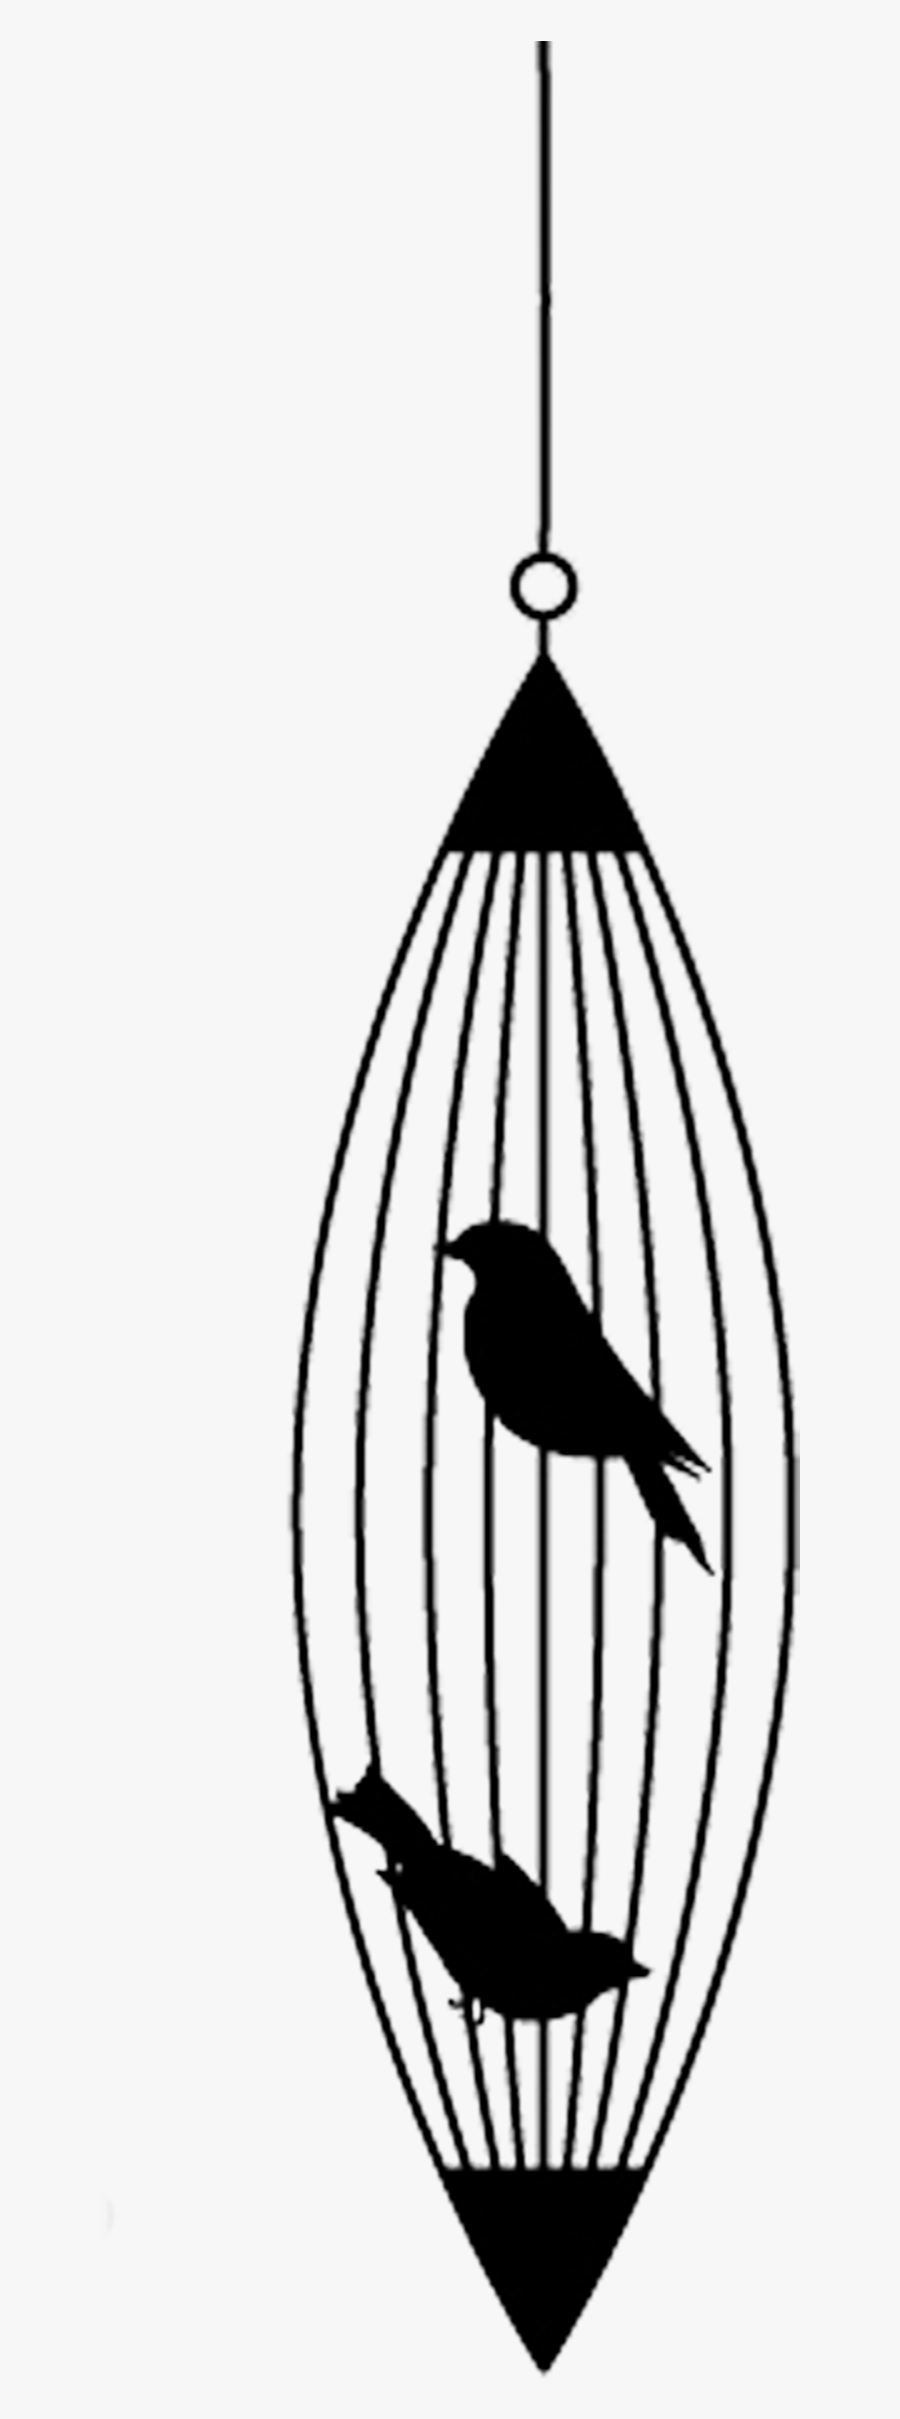 Oval Bird Cage Png Download - Cage, Transparent Clipart